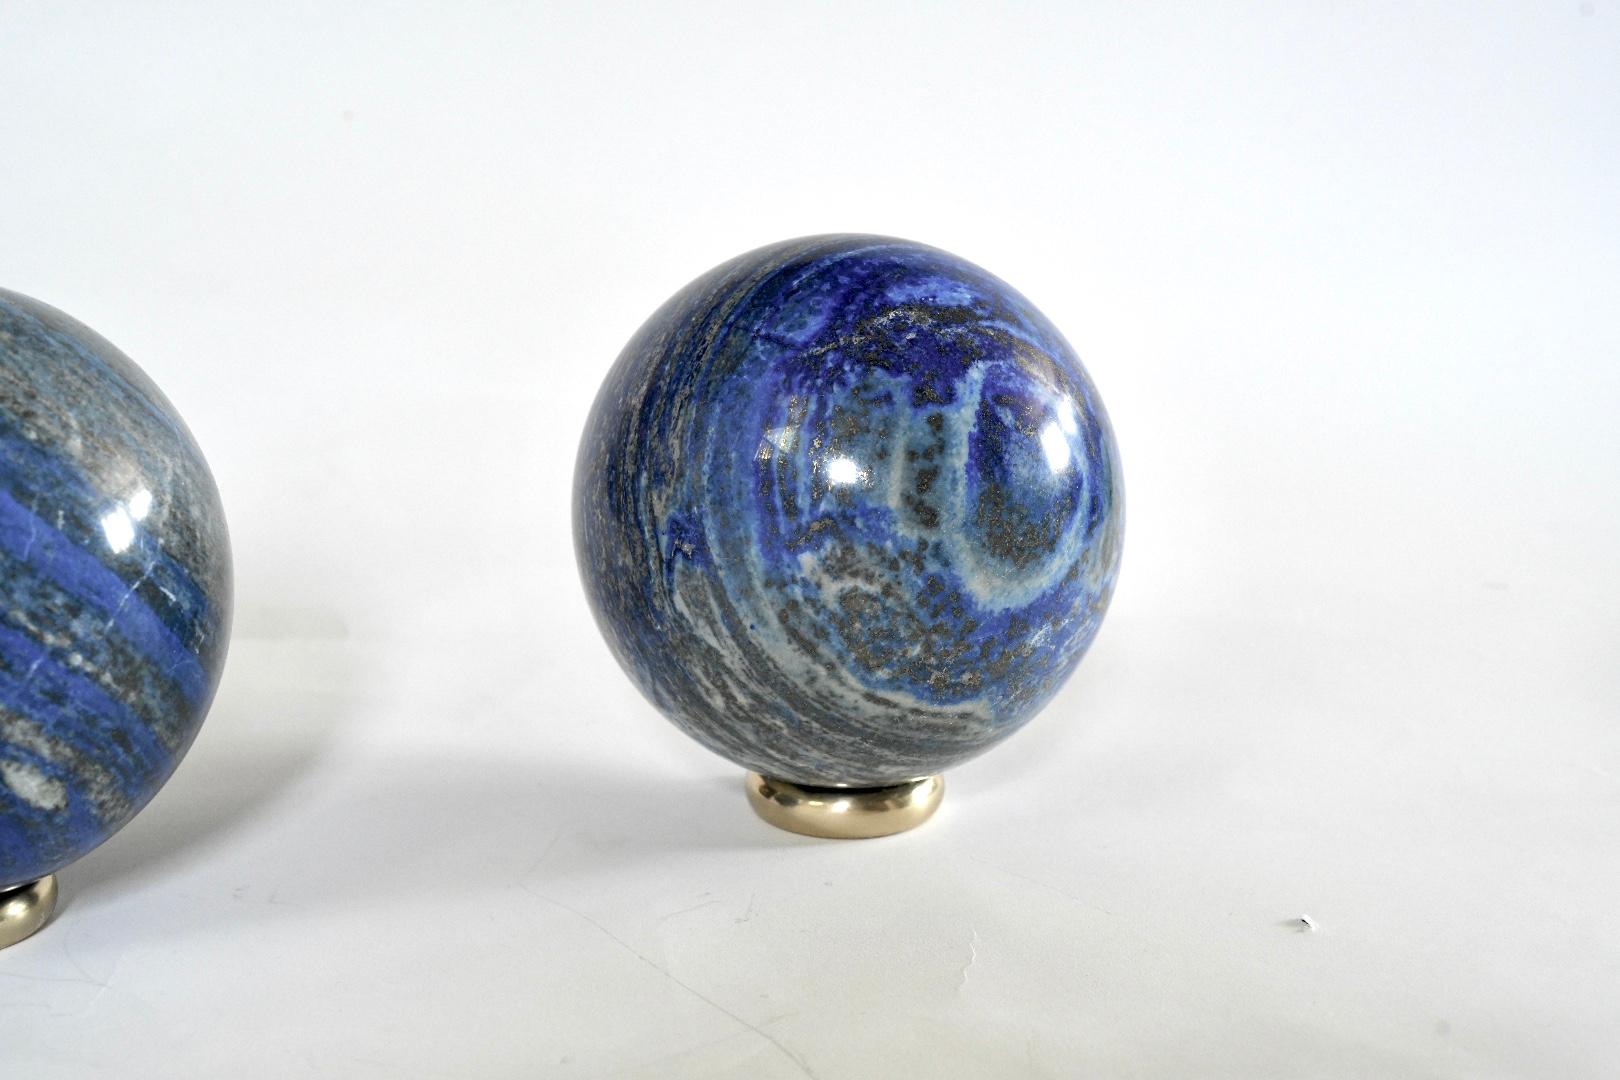 Group of two beautiful Lapis Lazuli balls with brass bases.